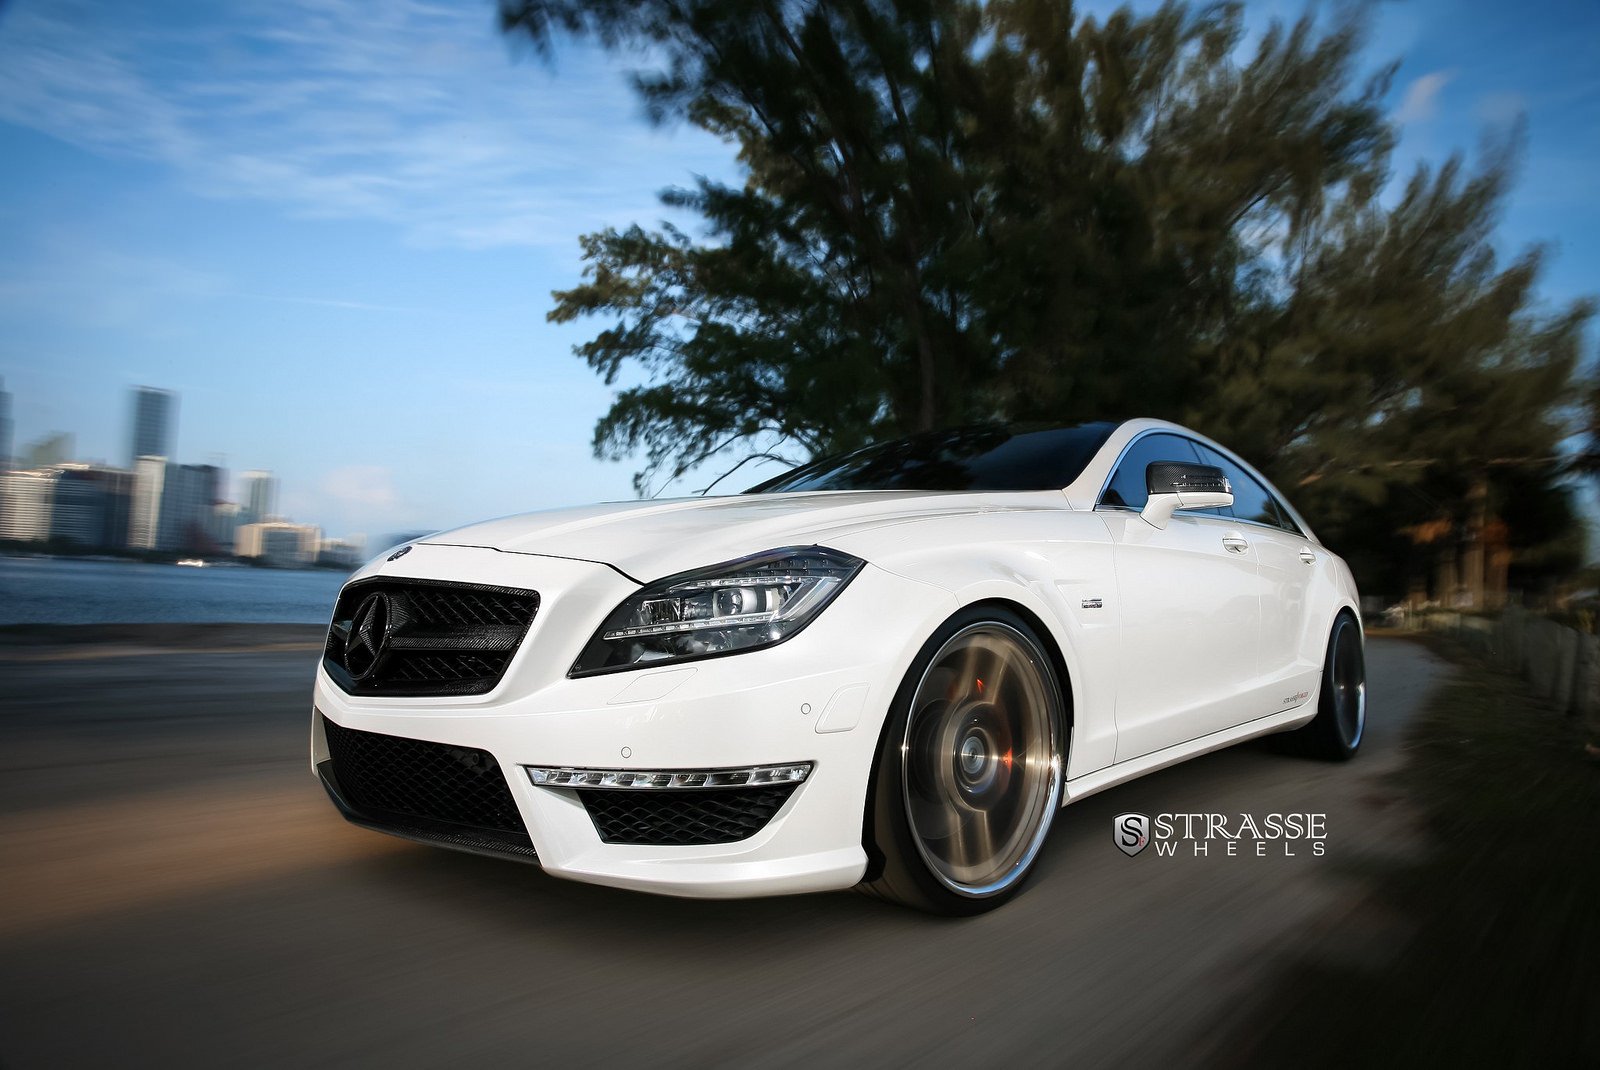 mercedes, Cls63, Amg, Strasse, Wheels, Tuning, Cars, White Wallpaper